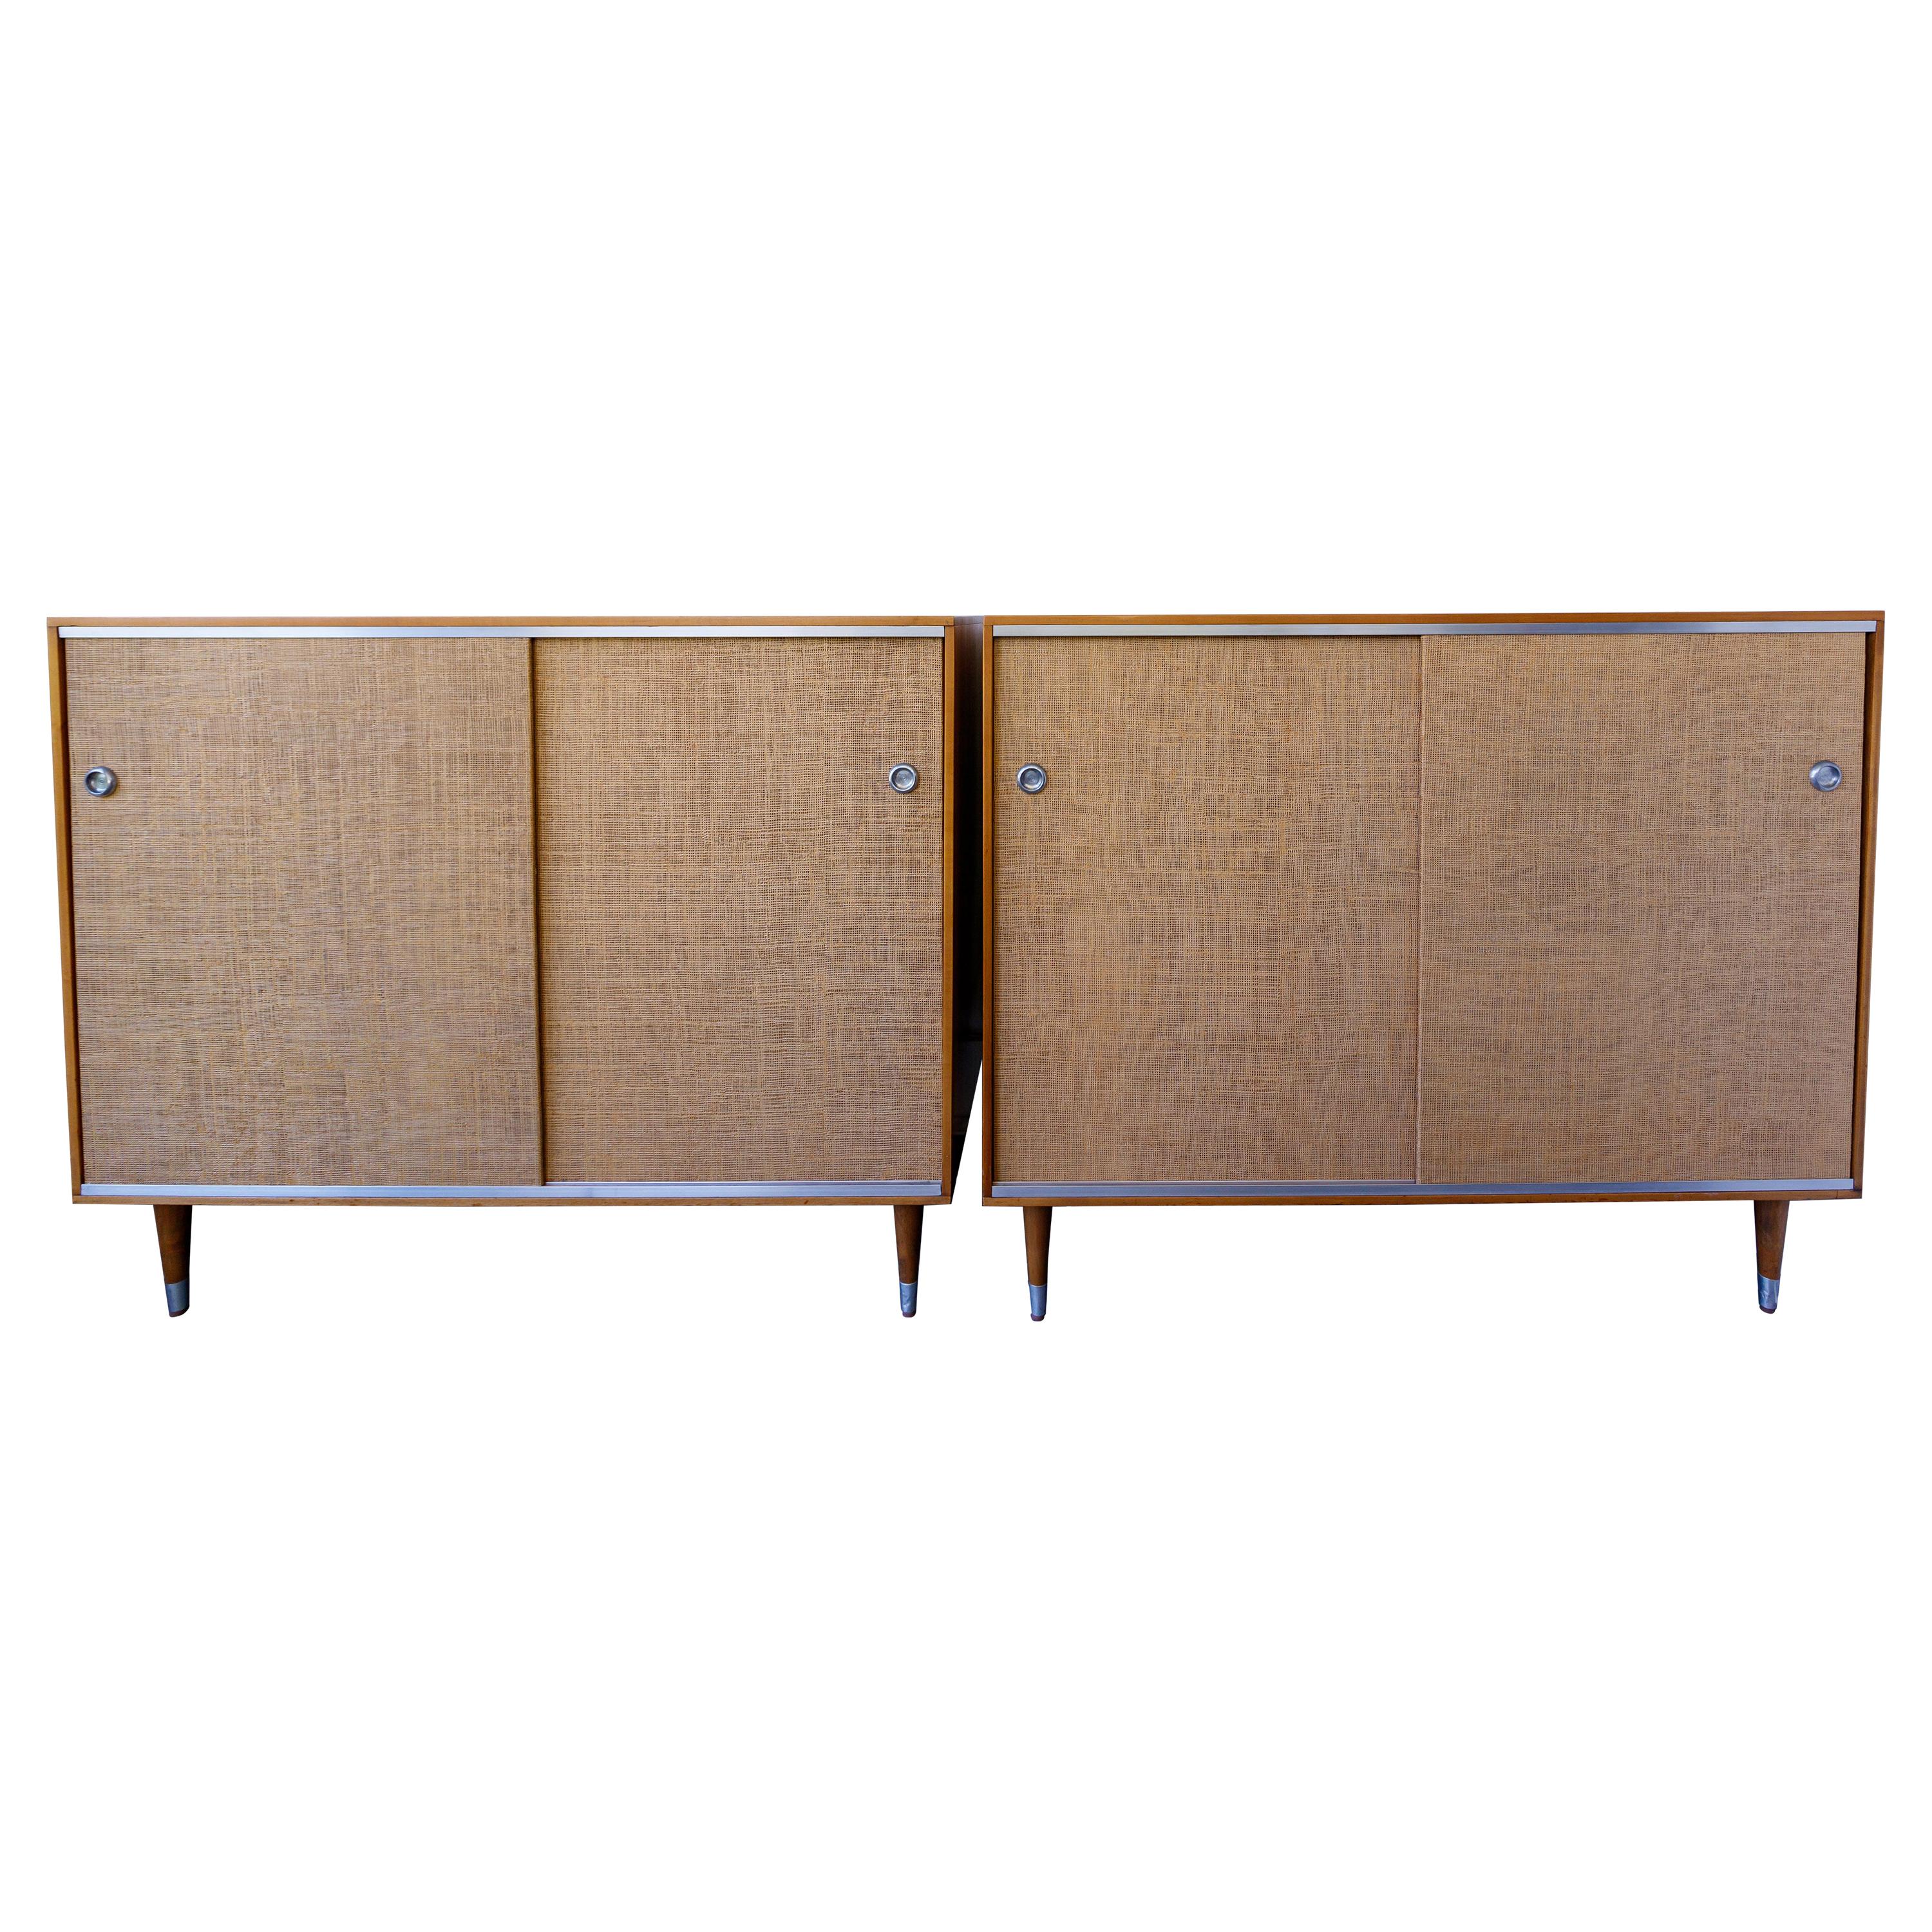 Pair of Wood Cabinets with Sliding Grass Covered Doors, by Herman Miller For Sale